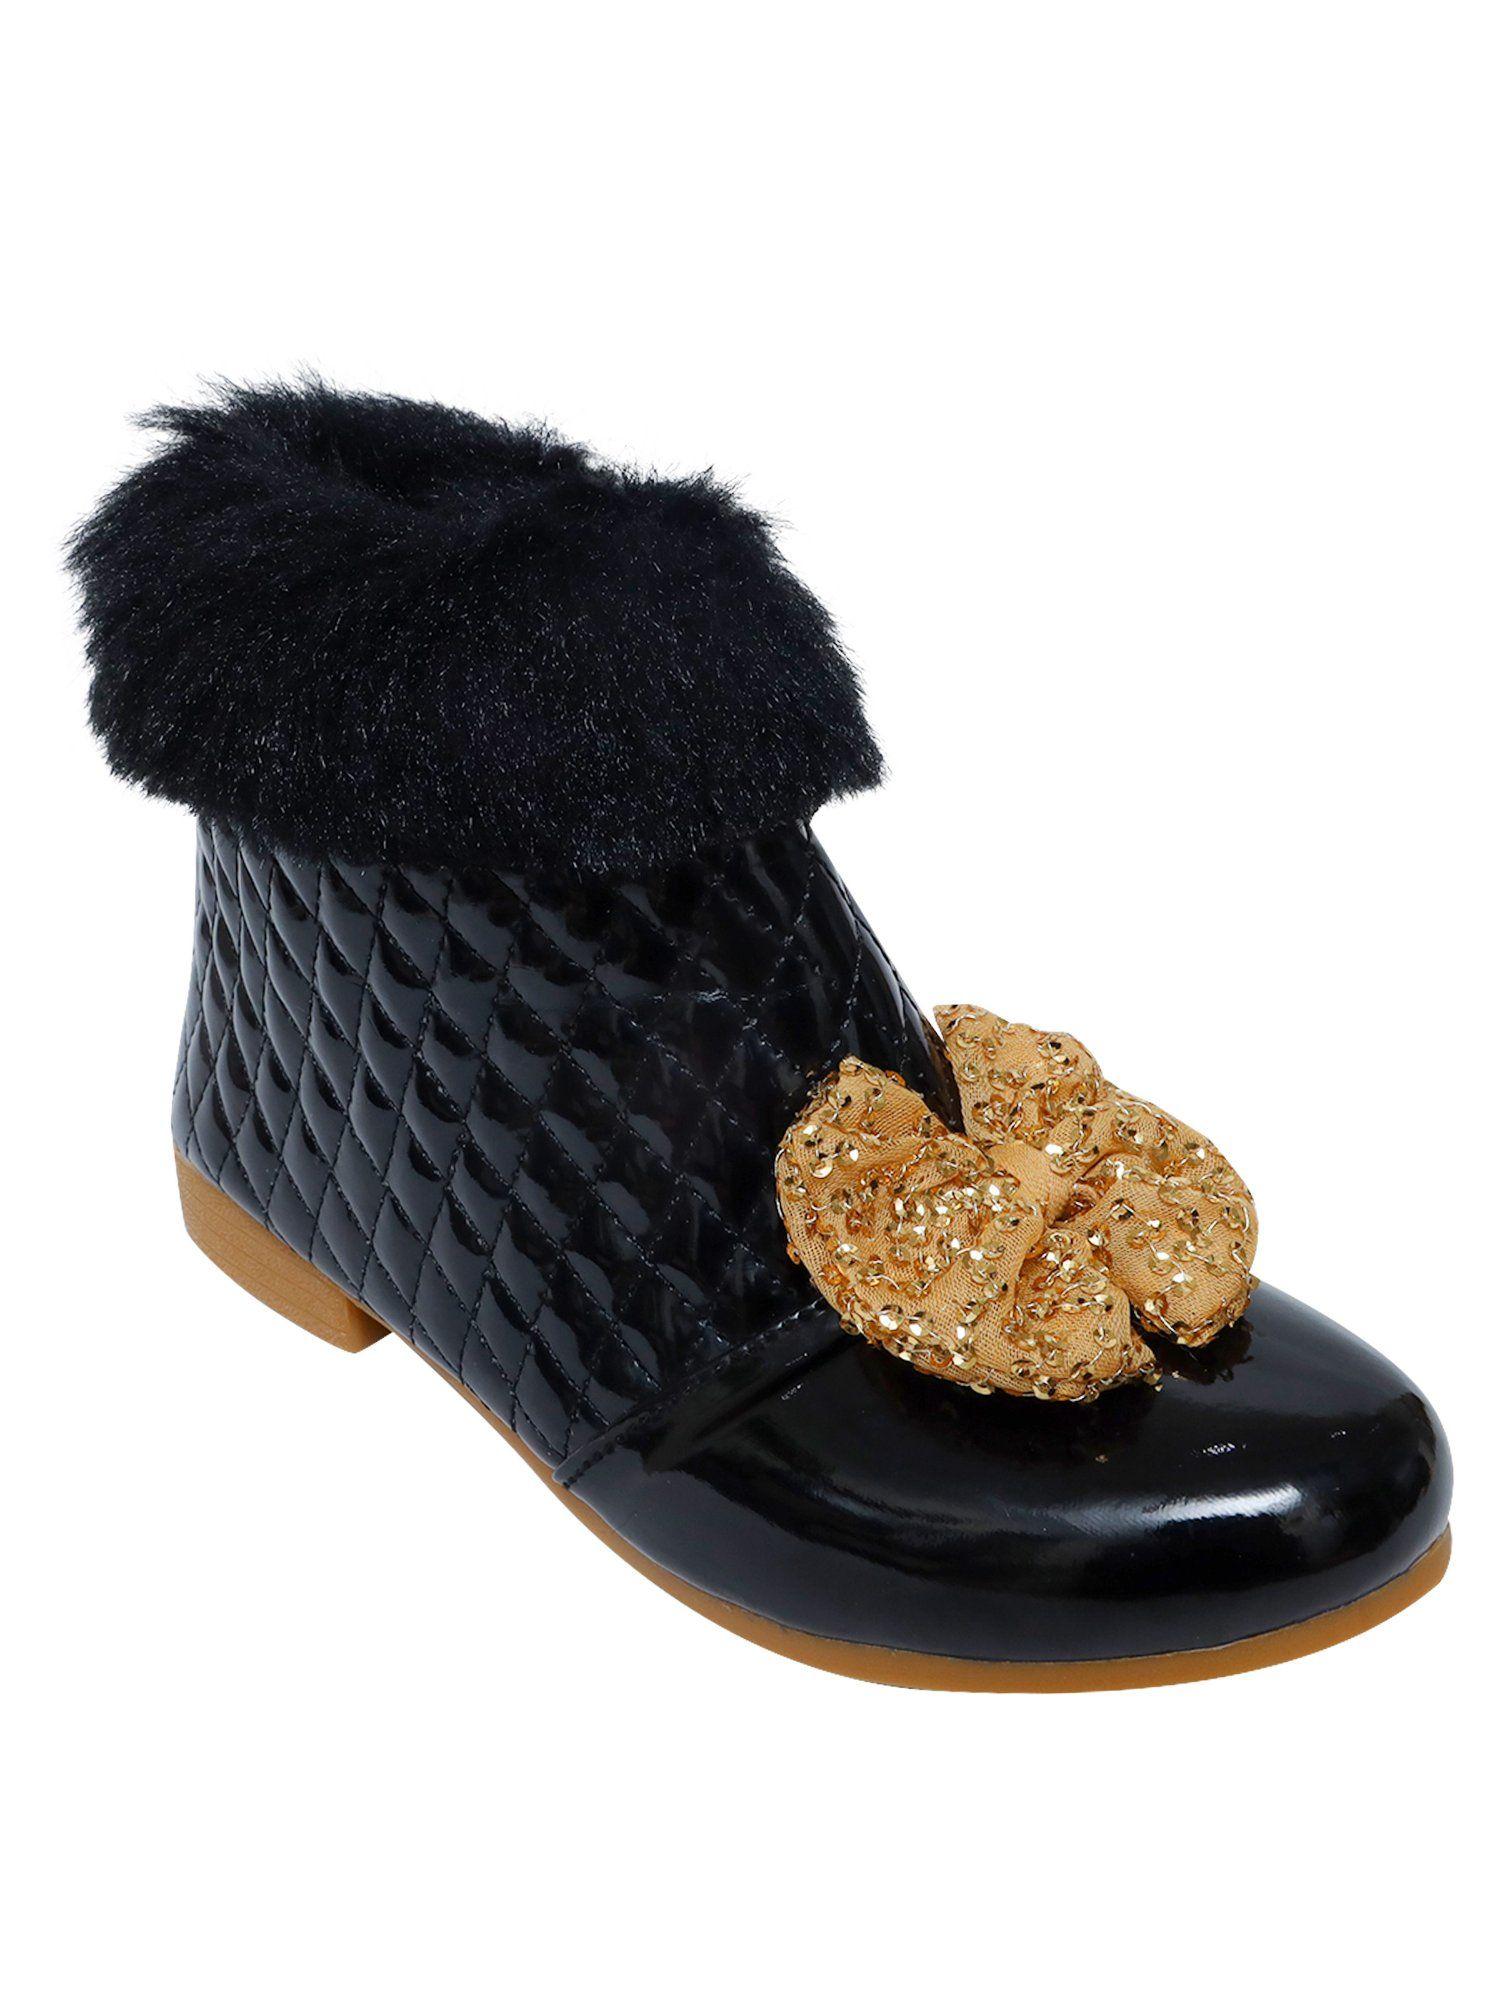 winter-black-boots-for-girls-with-bow-applique